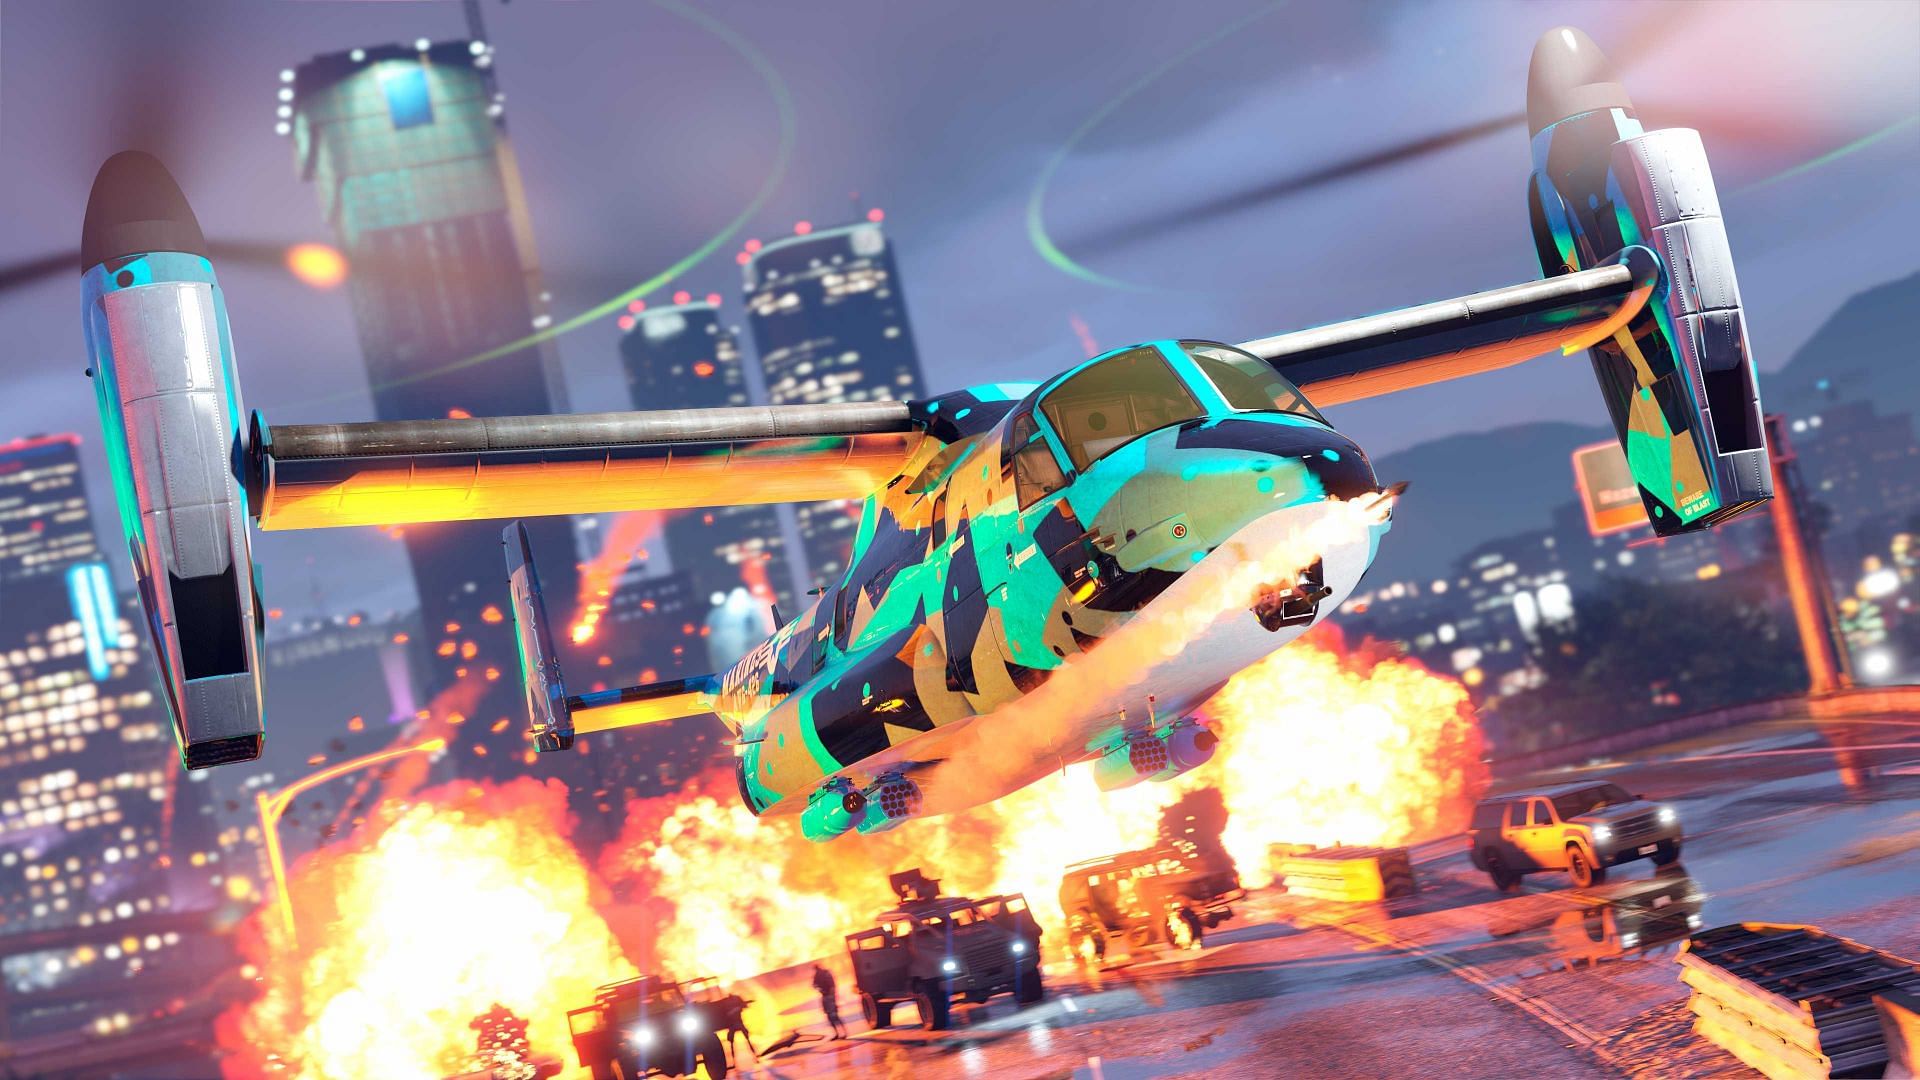 Avenger upgrades along with other things are coming soon to GTA Online (Image via Rockstar Games)